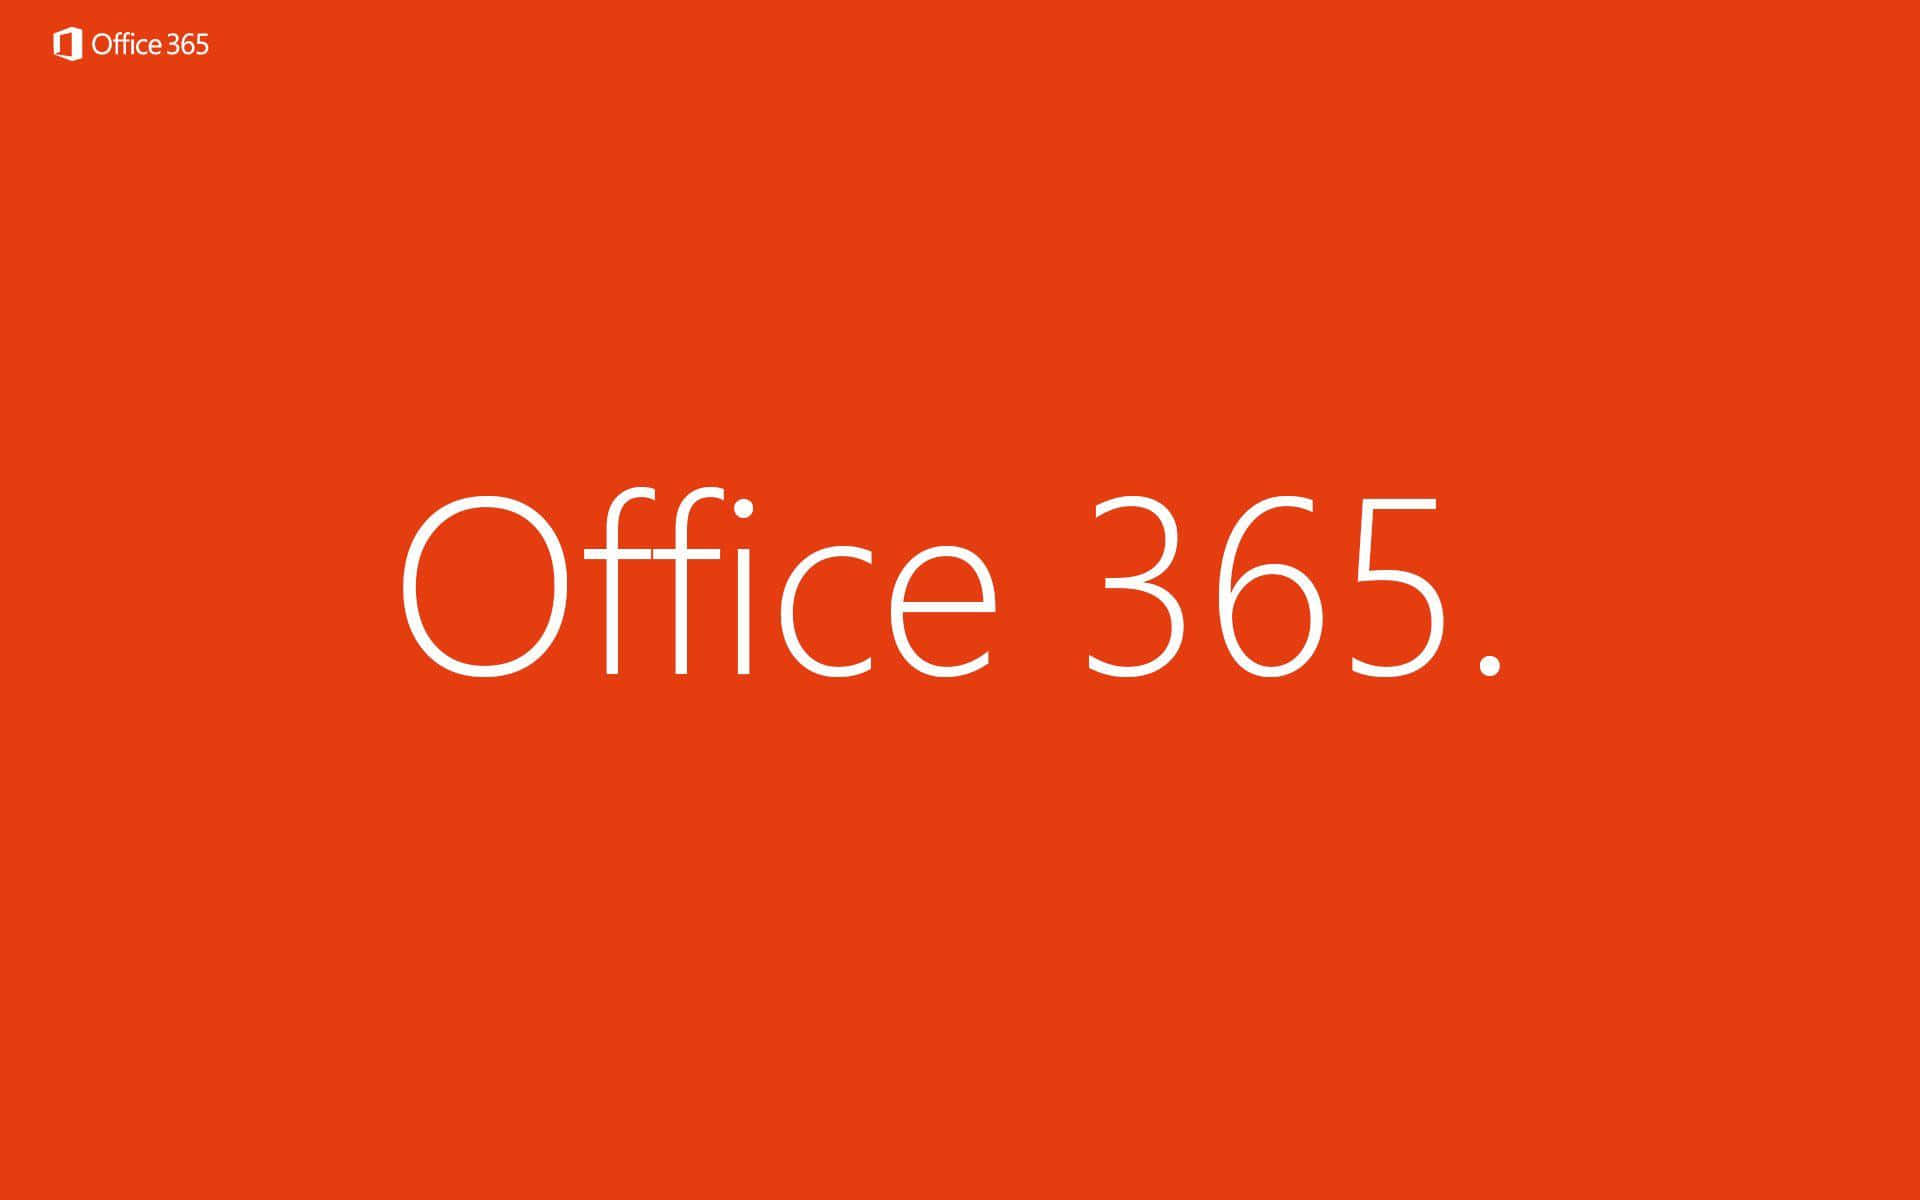 Connect and Collaborate Anywhere with Office 365